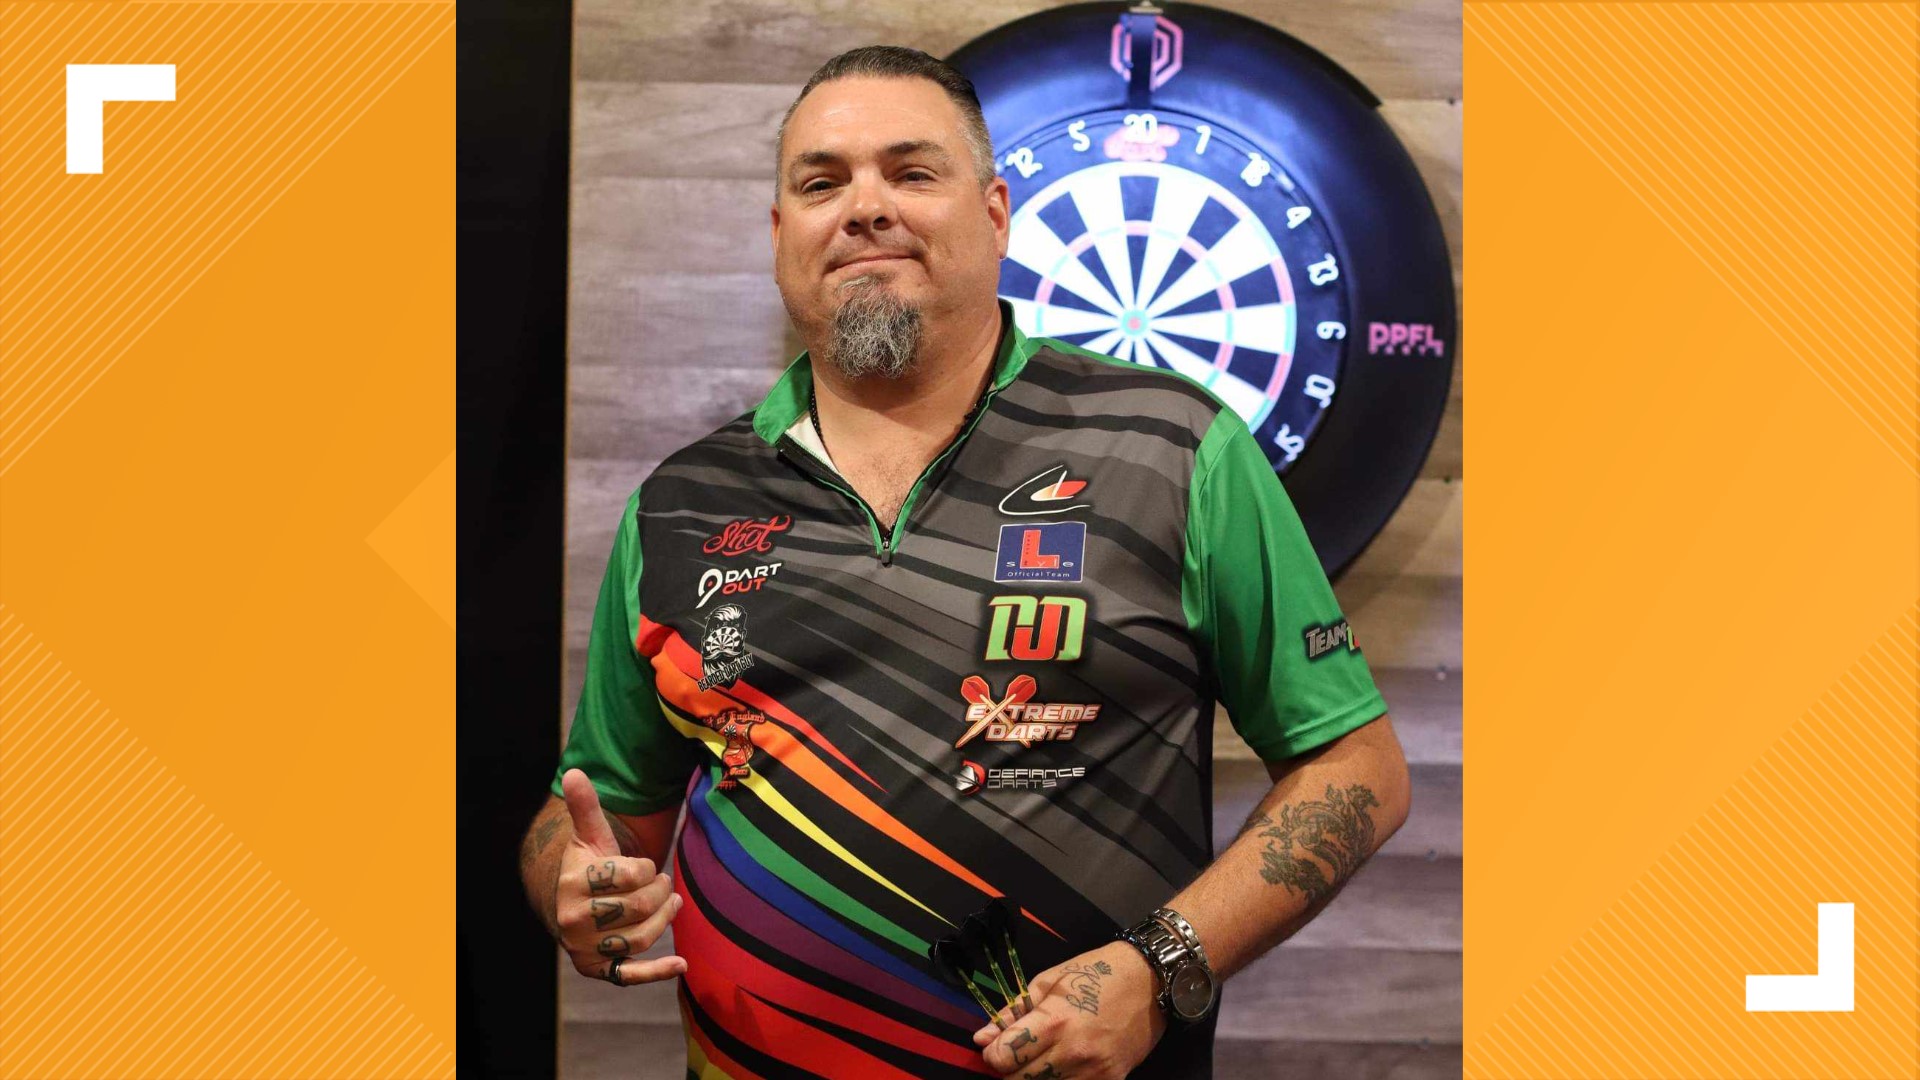 Portsmouth man represents the 757, and the United States, in professional dart competition